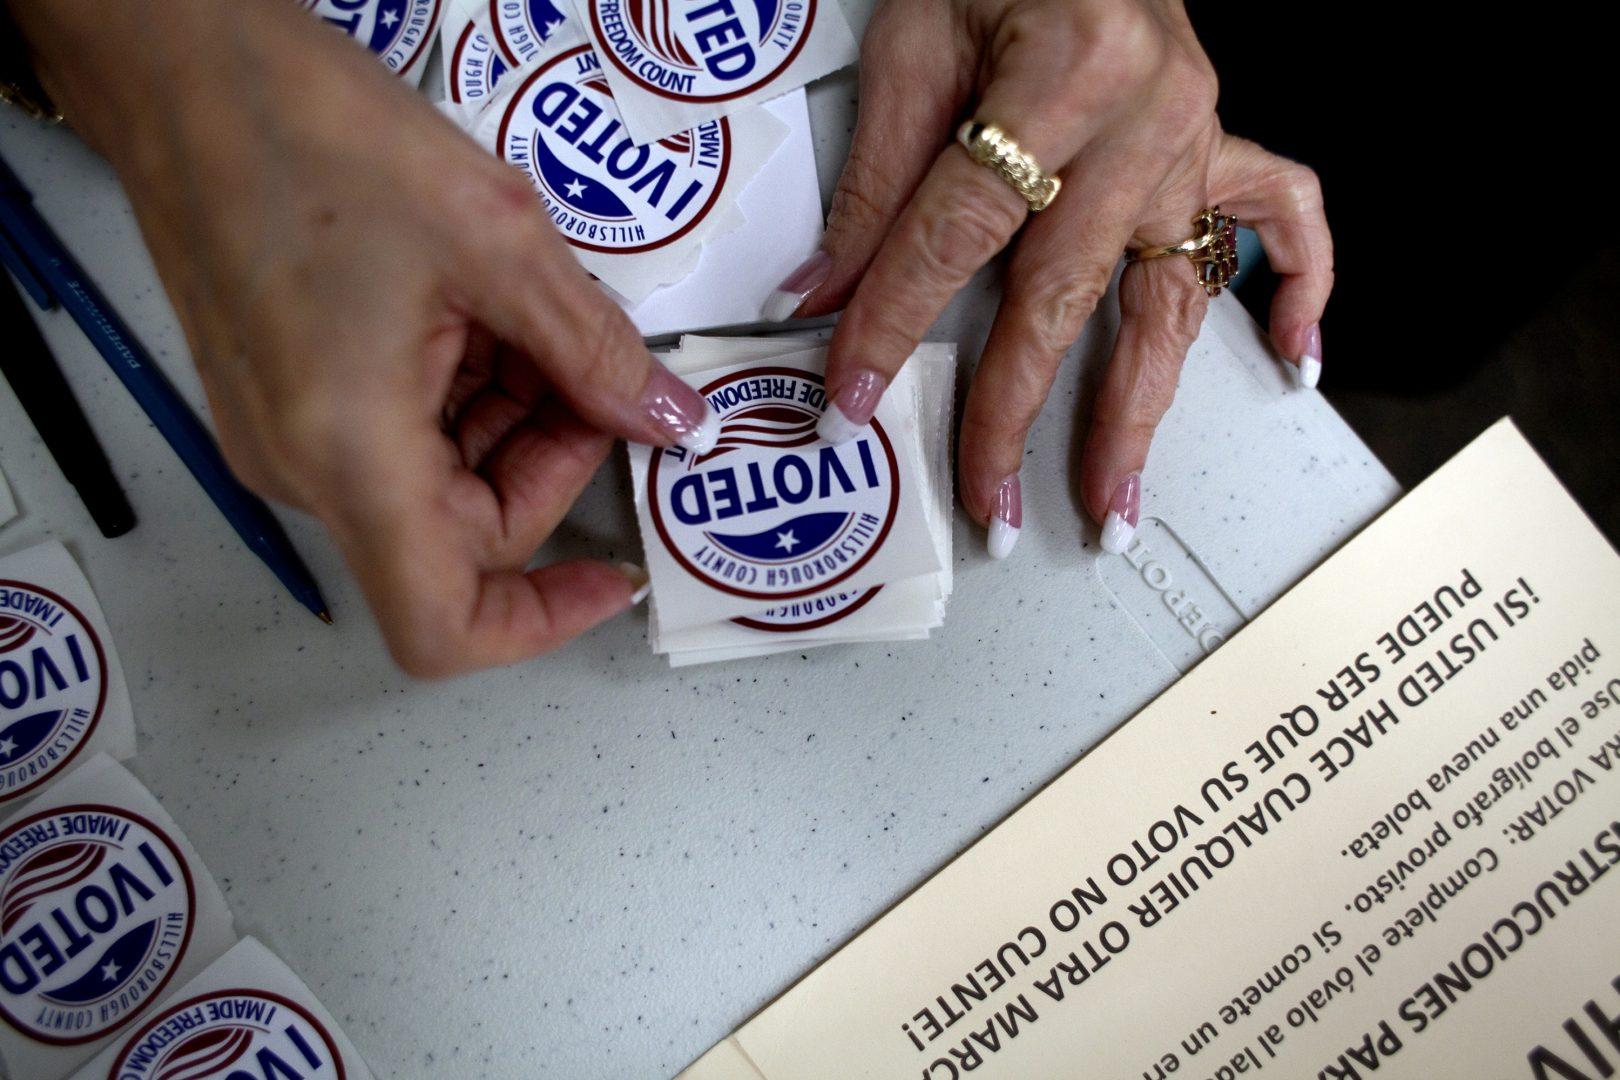 A poll worker gets I Voted stickers ready to hand to voters as they finished up at the ballot booths at Jan Kaminis Platt Regional Library in South Tampa, Fla., on November 6, 2012. (Carolina Hidalgo/Tampa Bay Times/TNS)